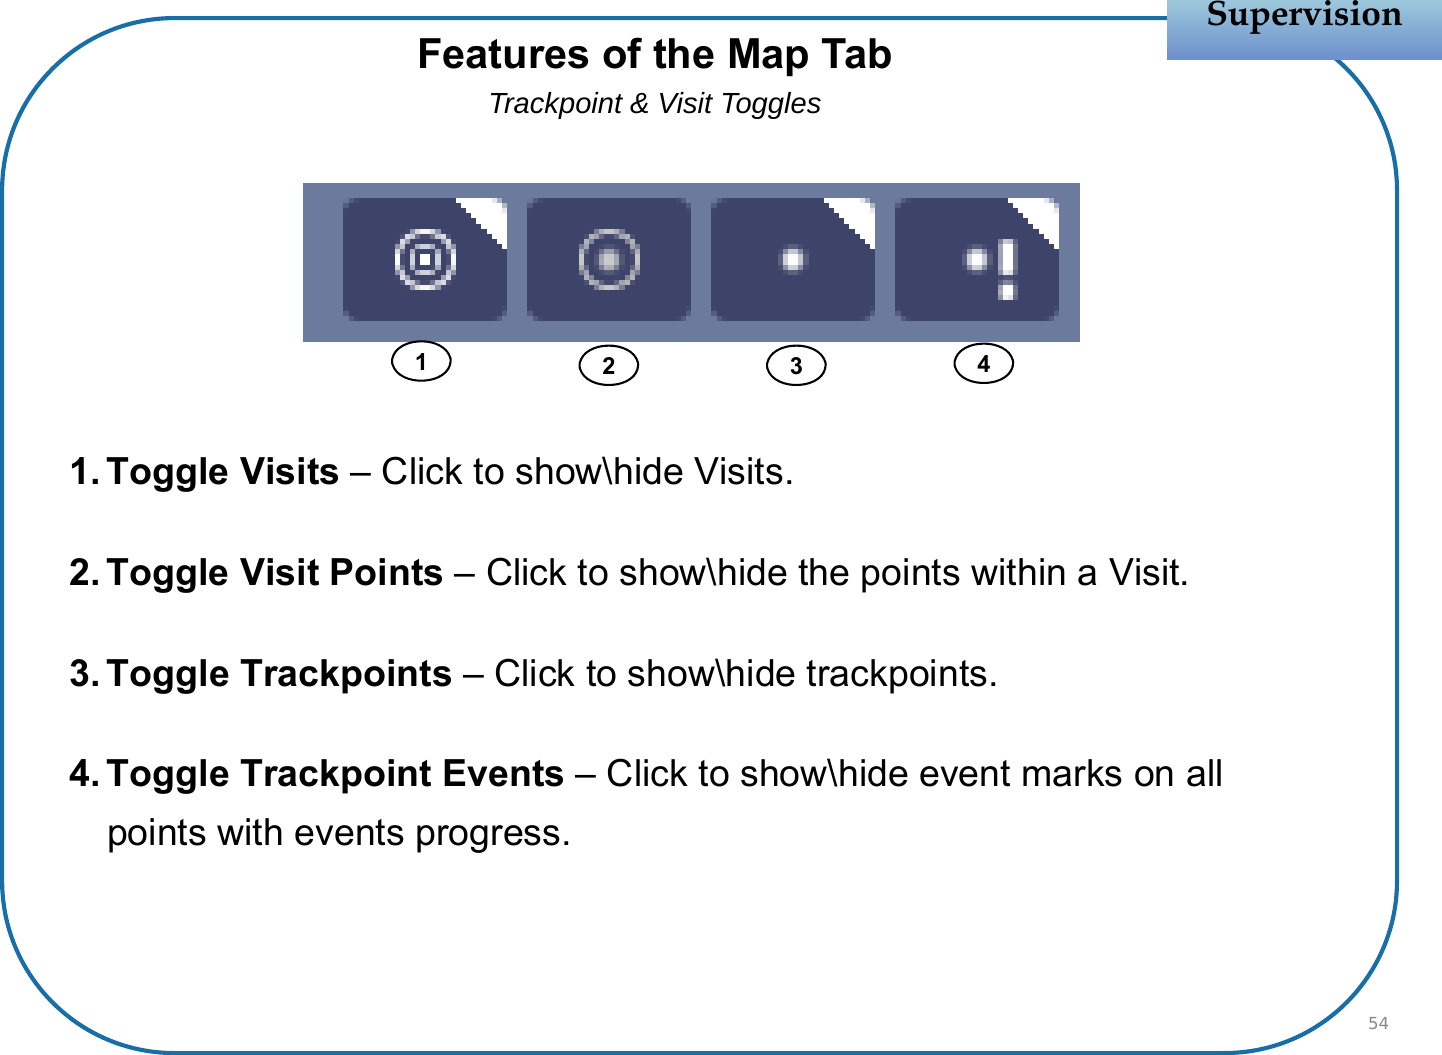 1. Toggle Visits – Click to show\hide Visits.2. Toggle Visit Points – Click to show\hide the points within a Visit.3. Toggle Trackpoints – Click to show\hide trackpoints.4. Toggle Trackpoint Events – Click to show\hide event marks on all points with events progress.SupervisionSupervision54Features of the Map TabTrackpoint &amp; Visit Toggles1234